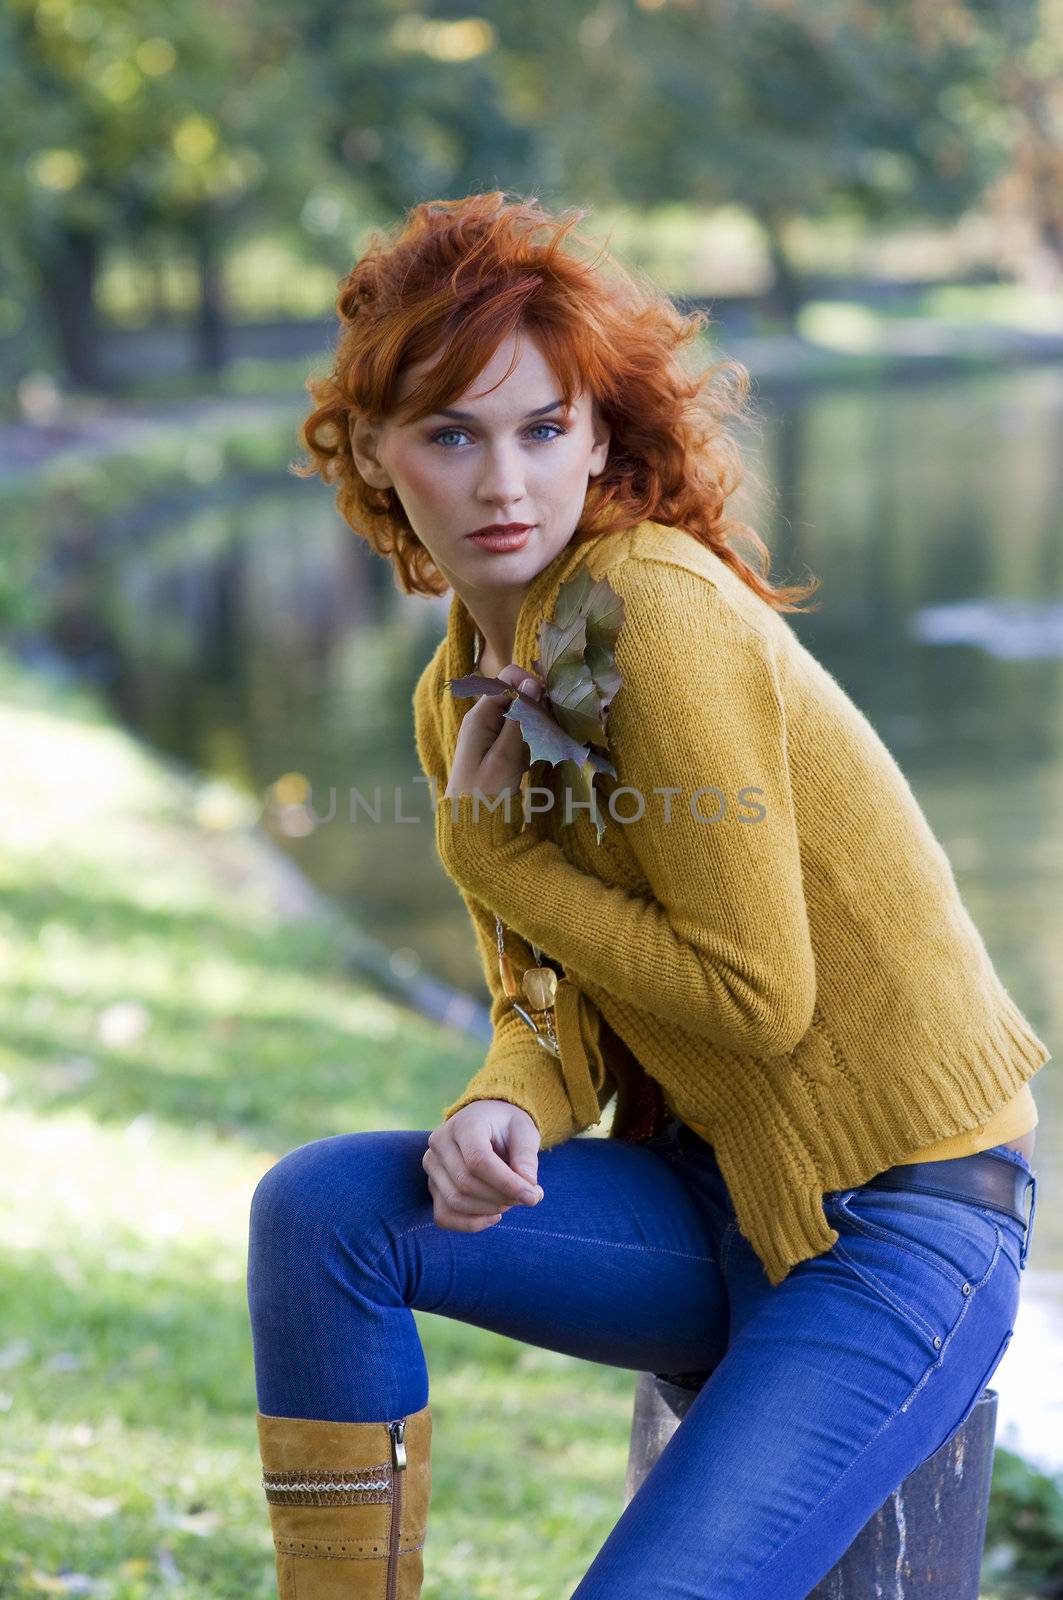 nice woman with red hair near the river in autumn season